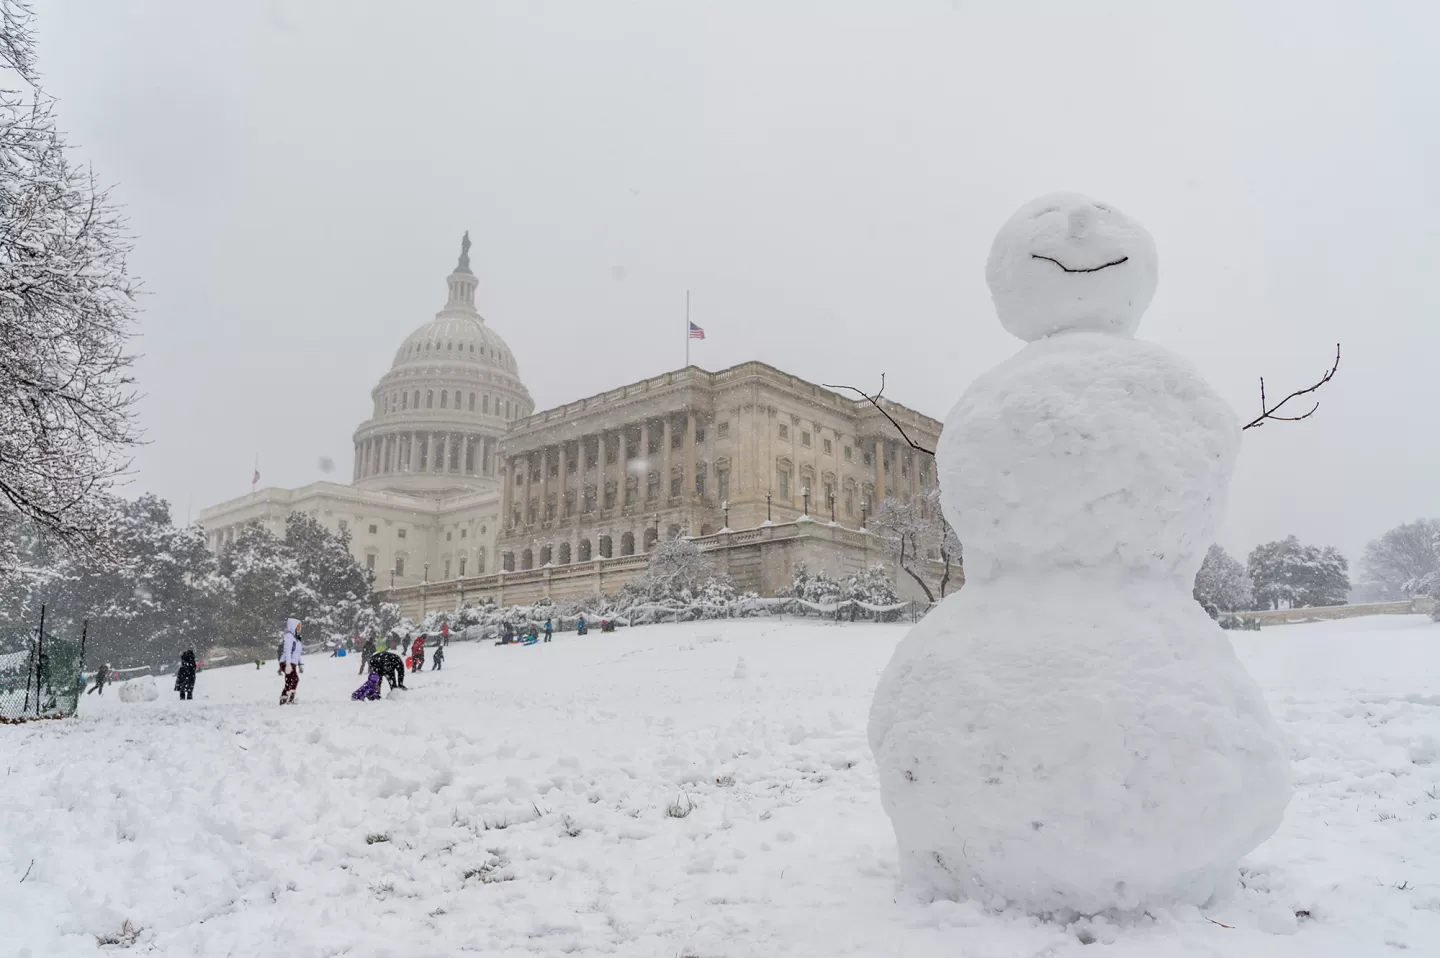 A snowman smiles on the West Front Lawn of the U.S. Capitol in Washington, D.C.